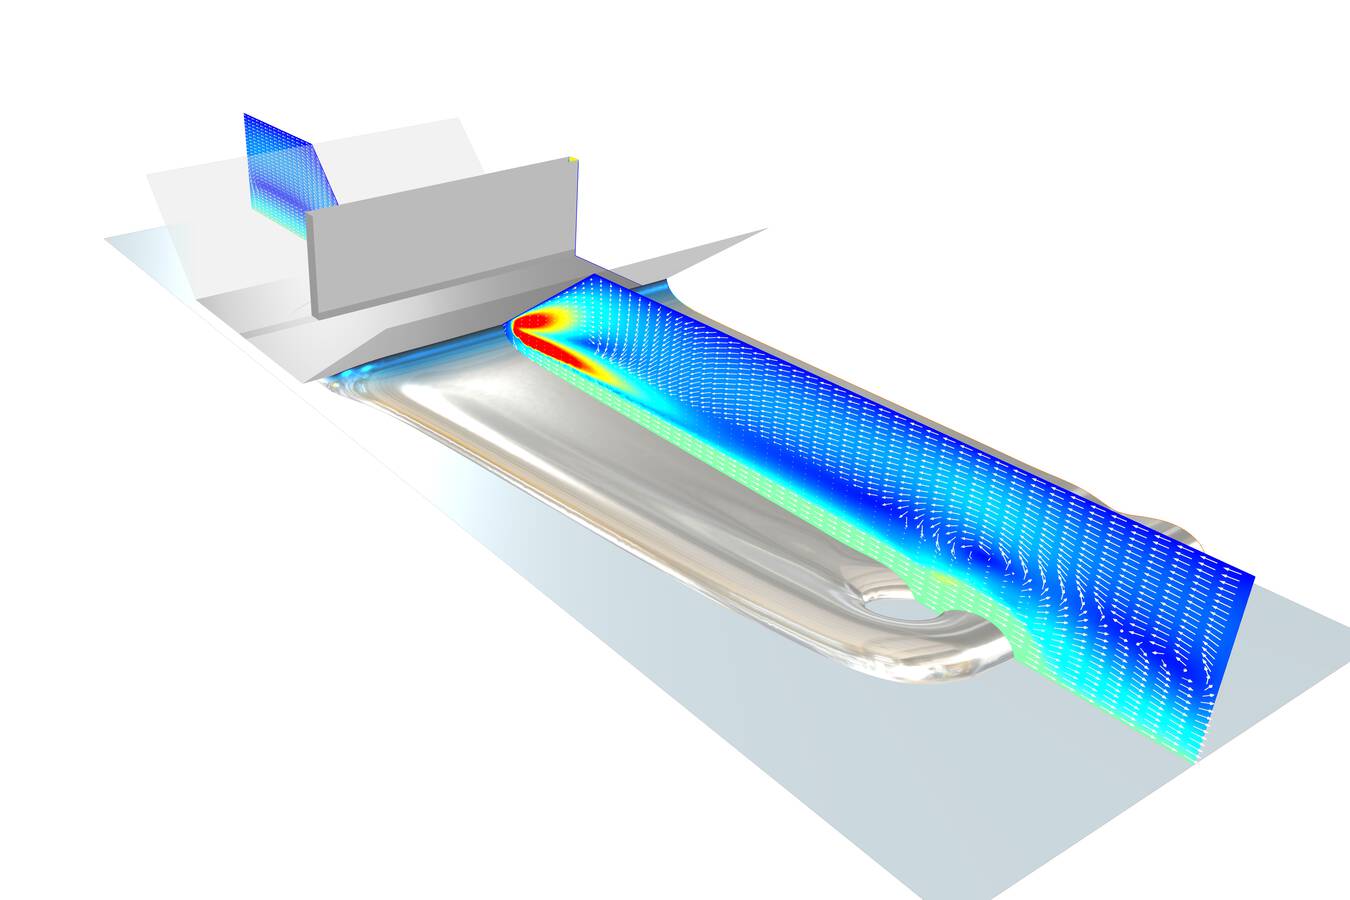 COMSOL Releases Version 5.6 and Introduces Four New Products The capabilities of modeling polymer flow and high-accuracy fluid models have been expanded, among others.